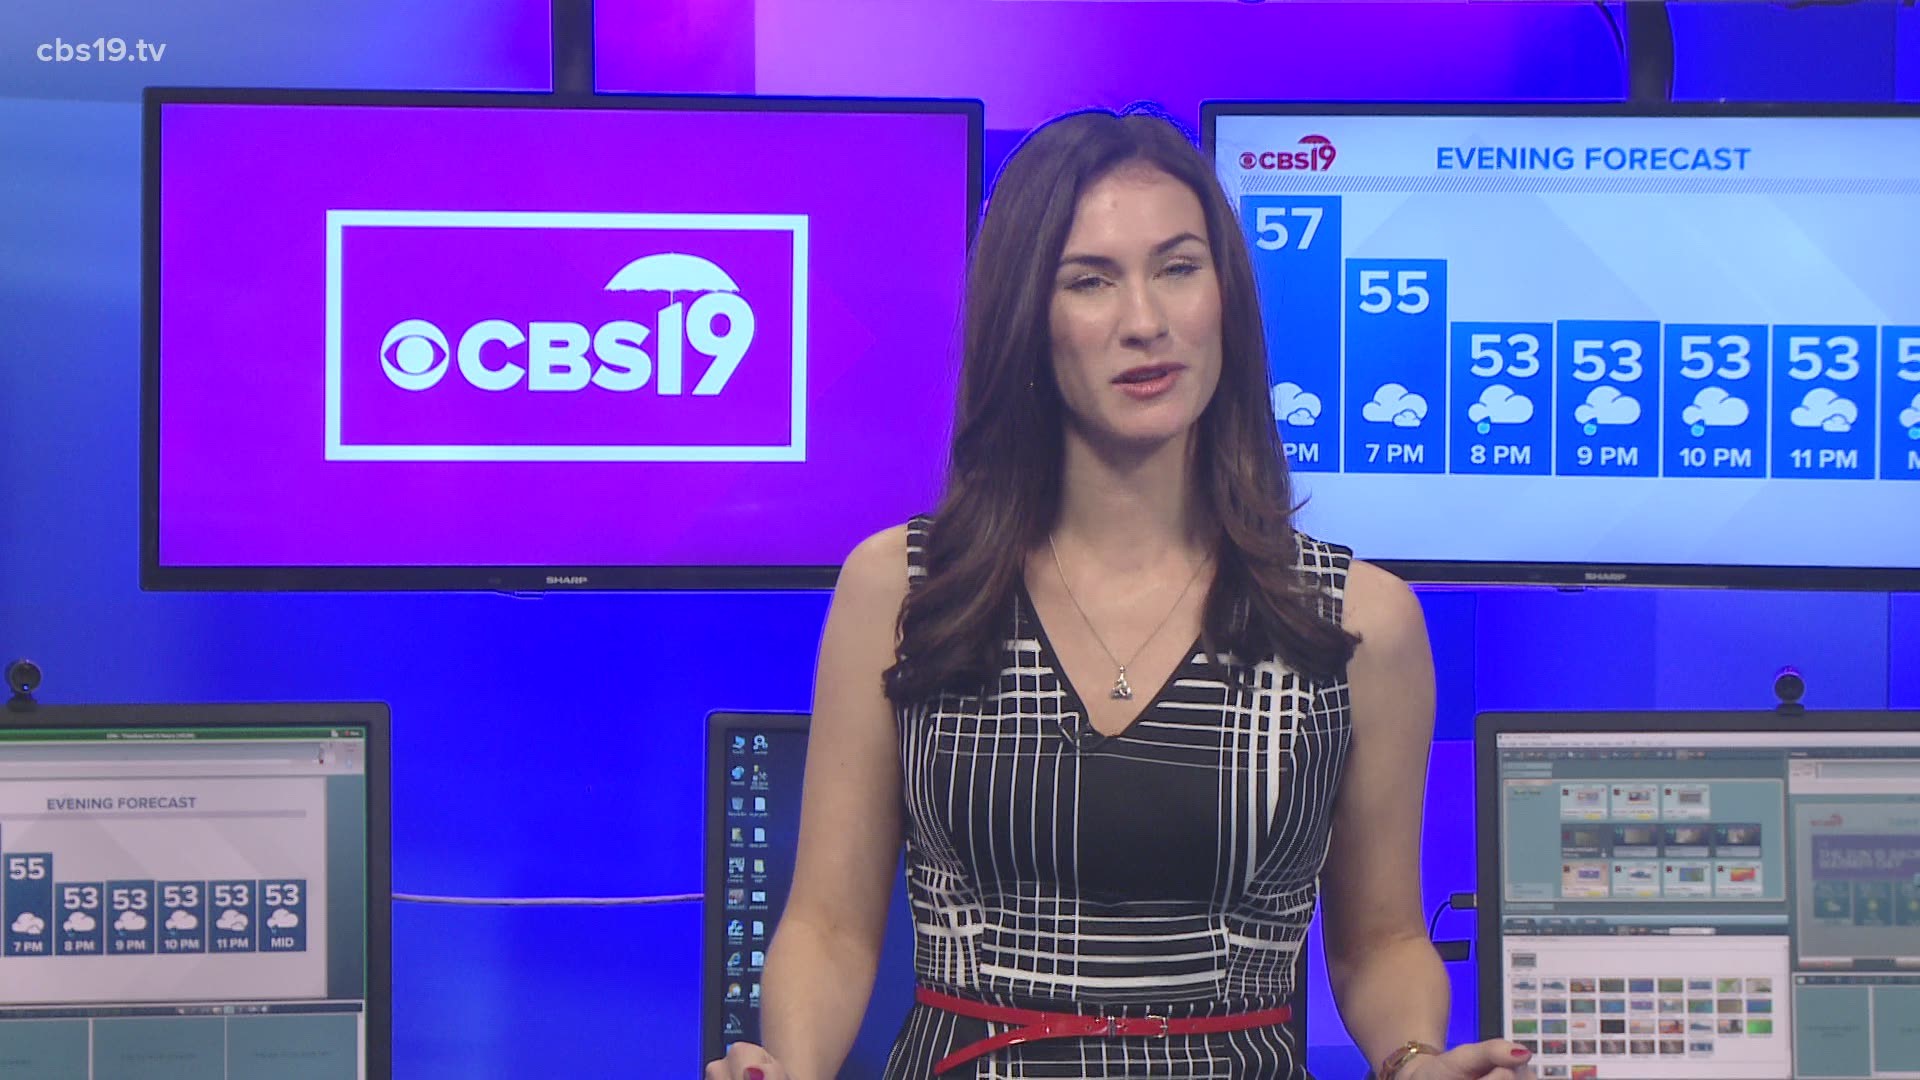 Colleen Campbell is the newest meteorologist to join the CBS19 Weather Team!